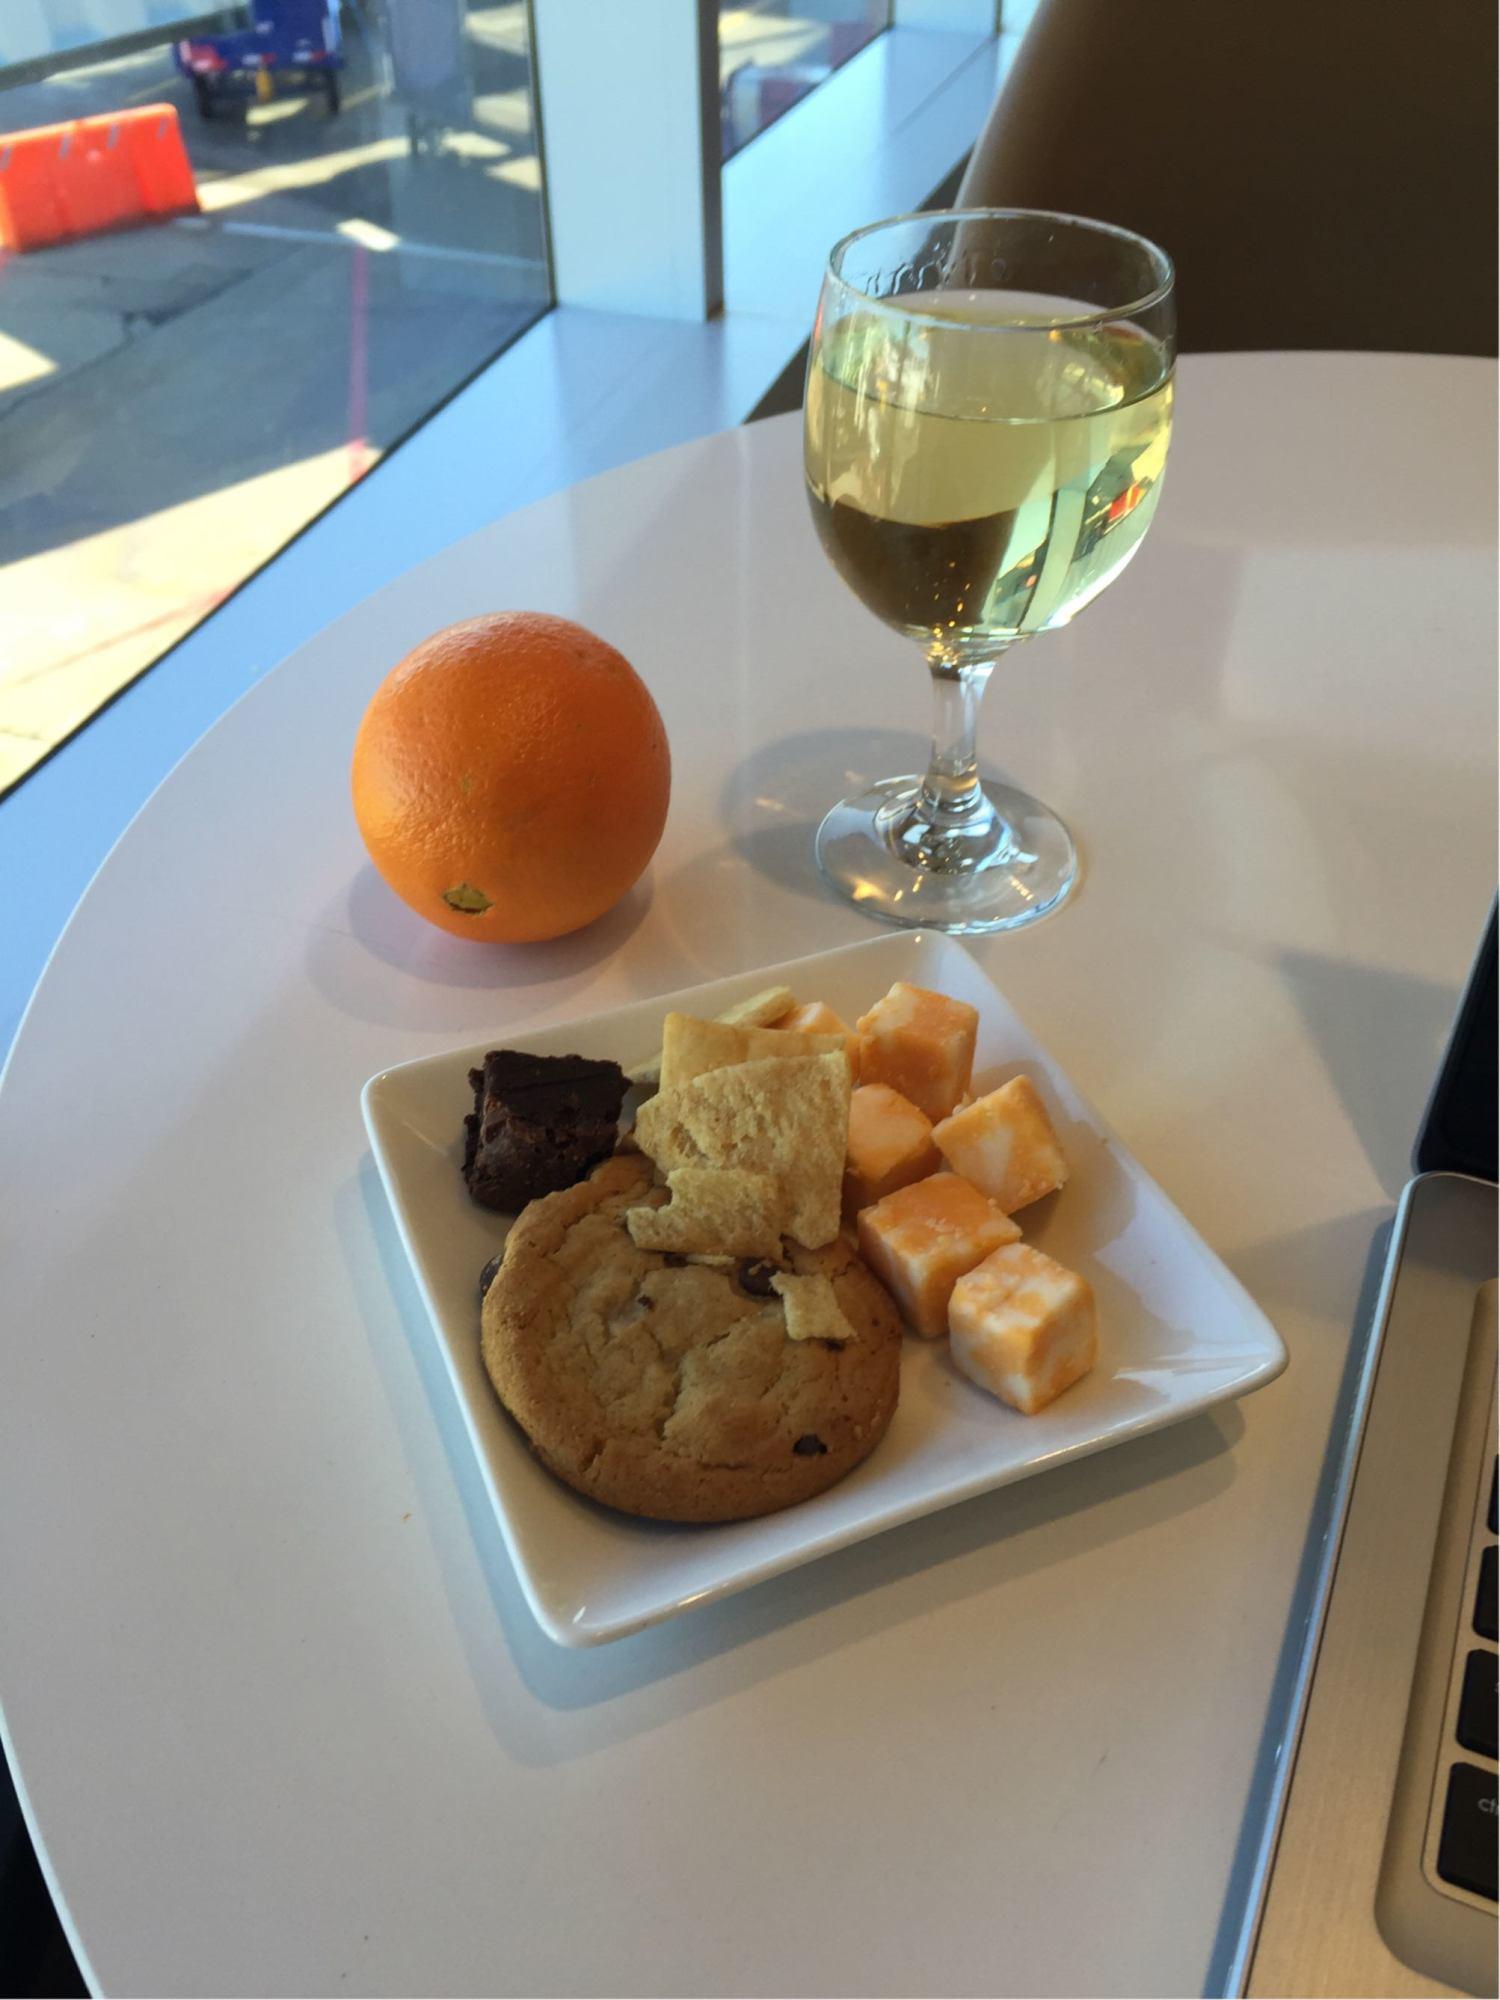 American Airlines Admirals Club image 45 of 50